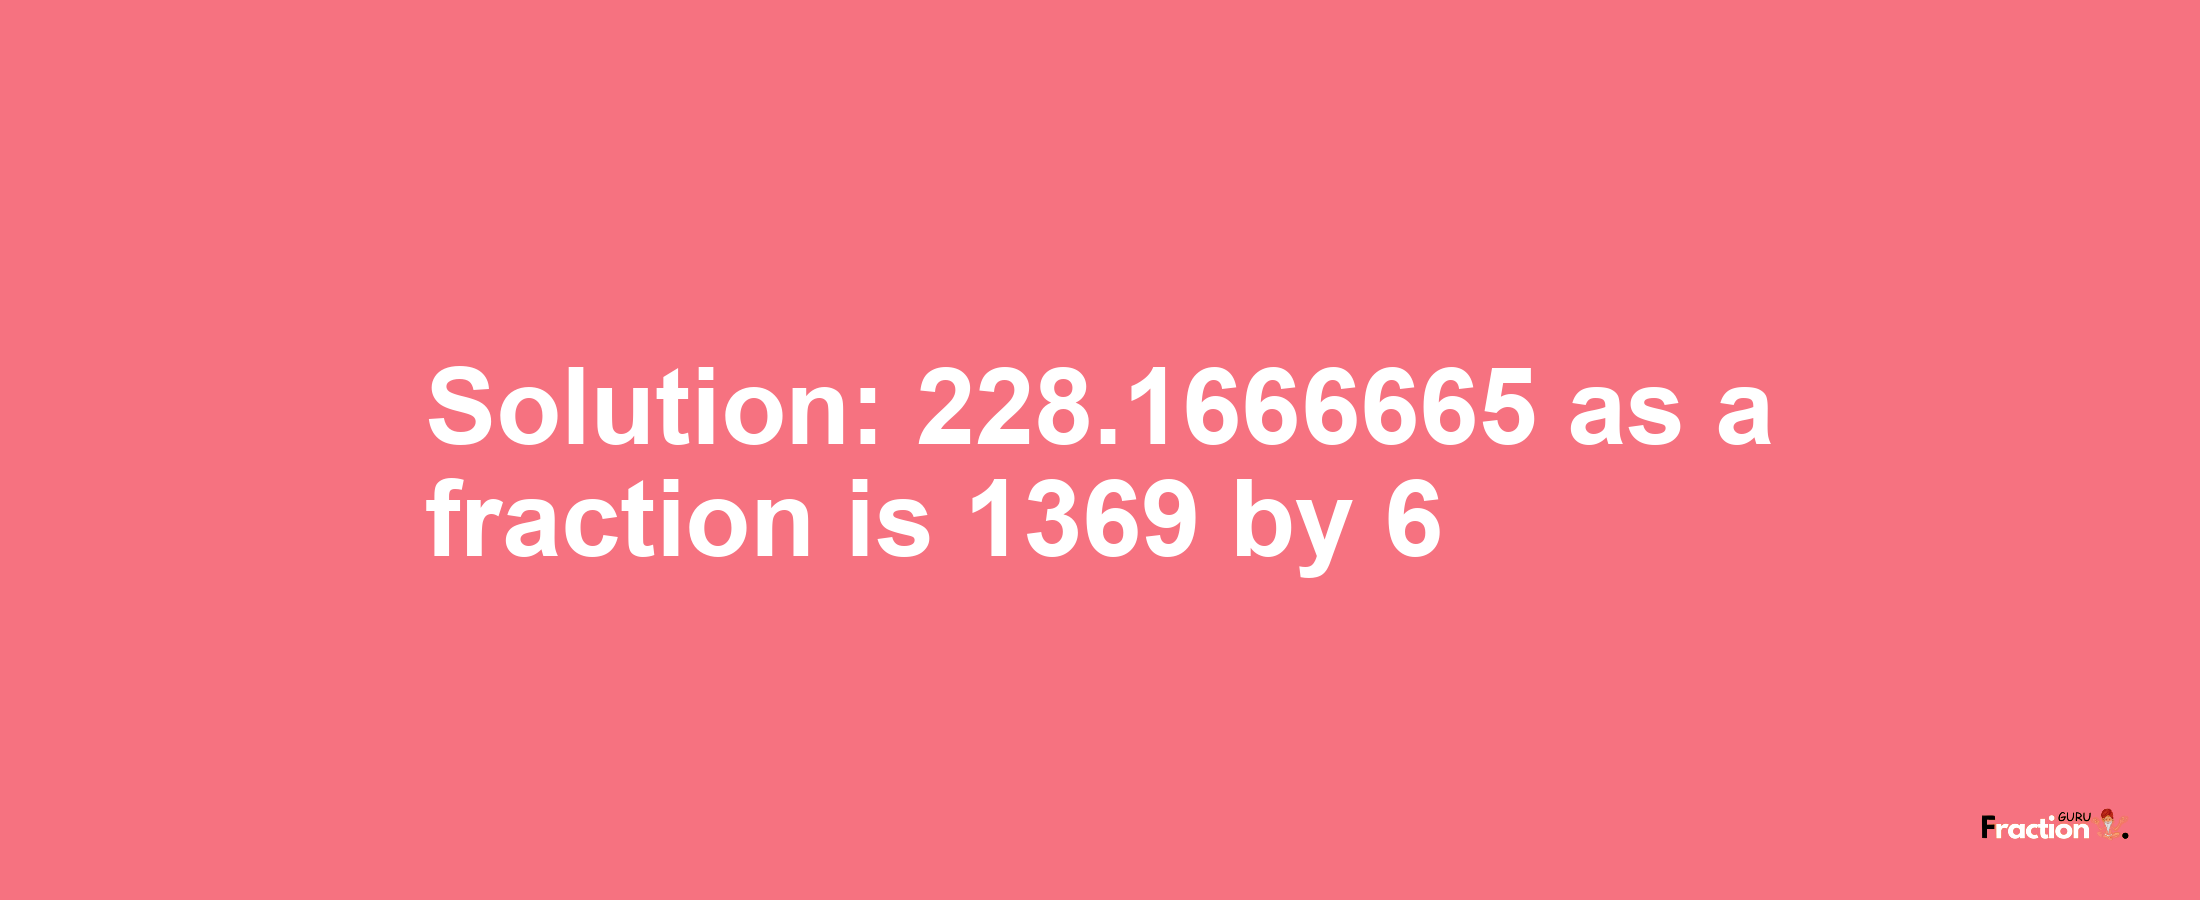 Solution:228.1666665 as a fraction is 1369/6